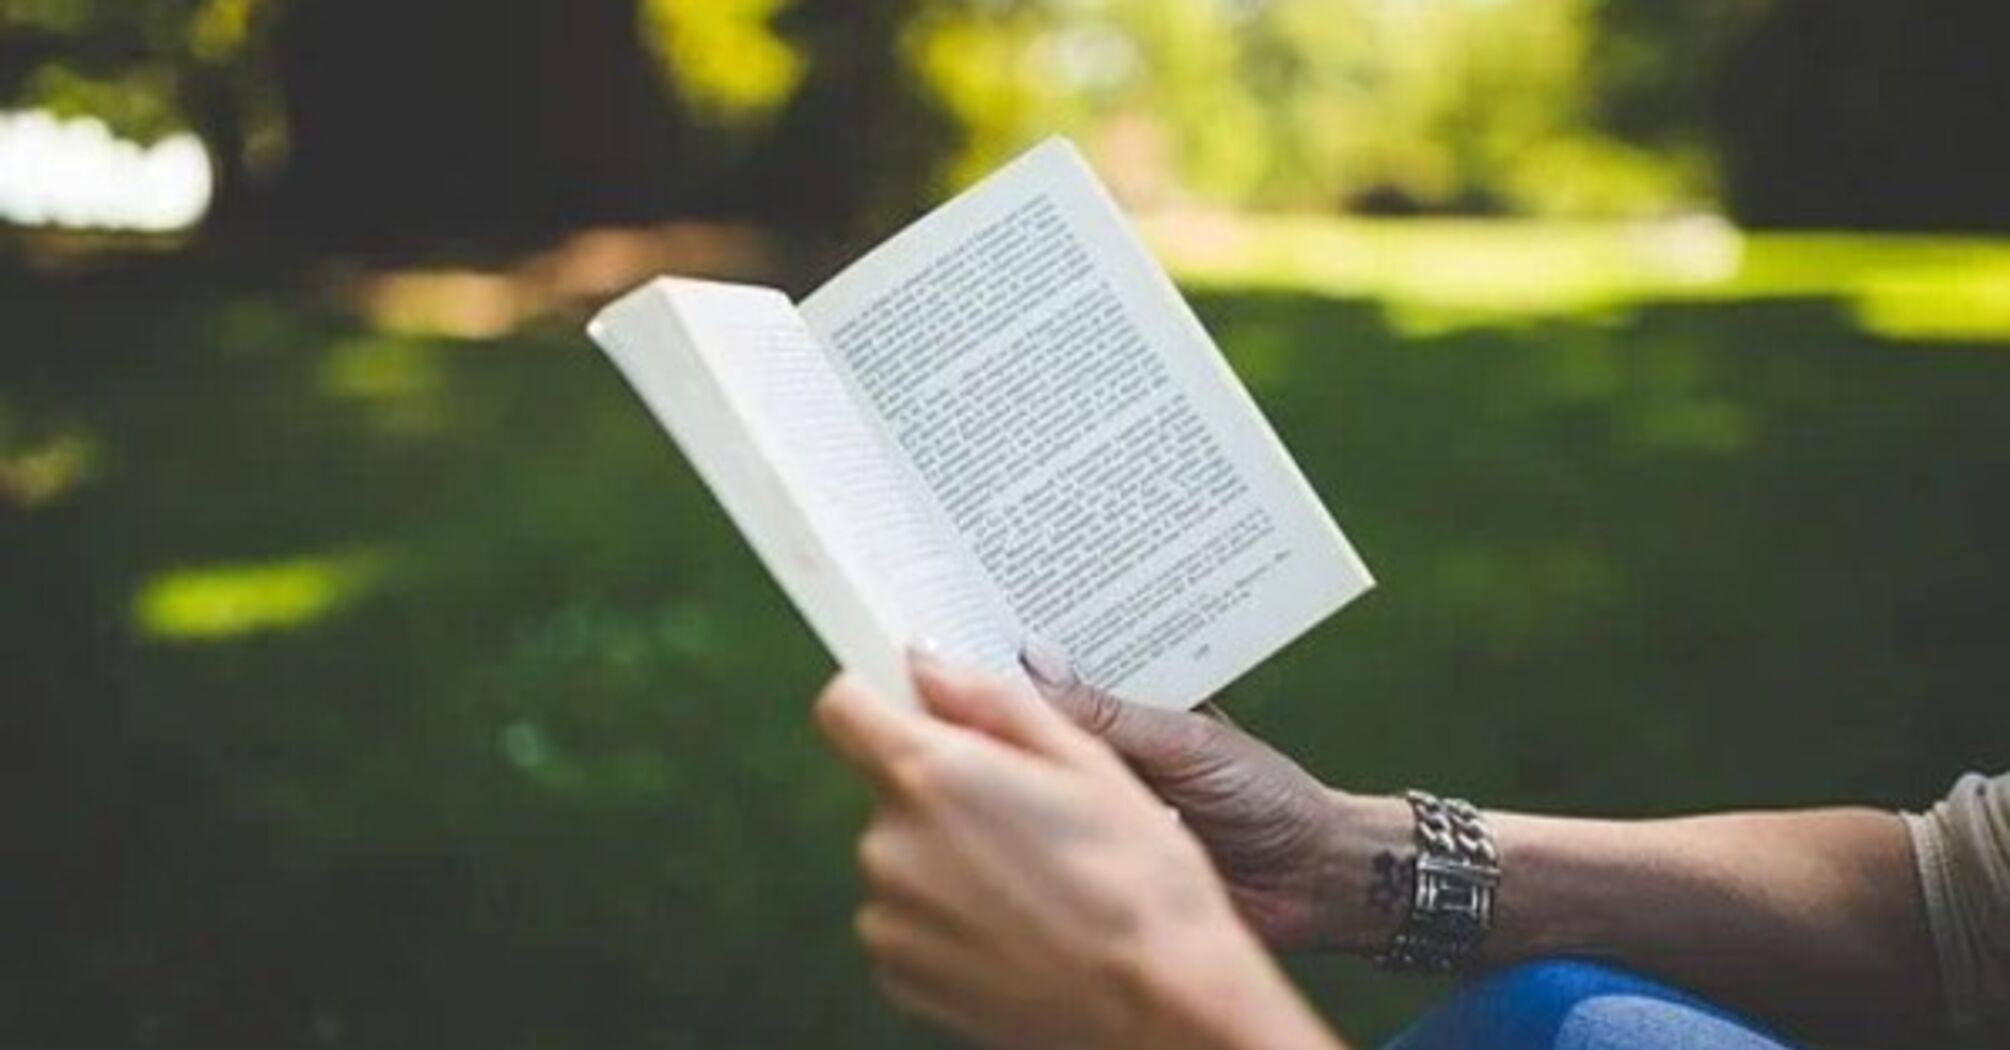 5 tips to develop or regain your reading habit